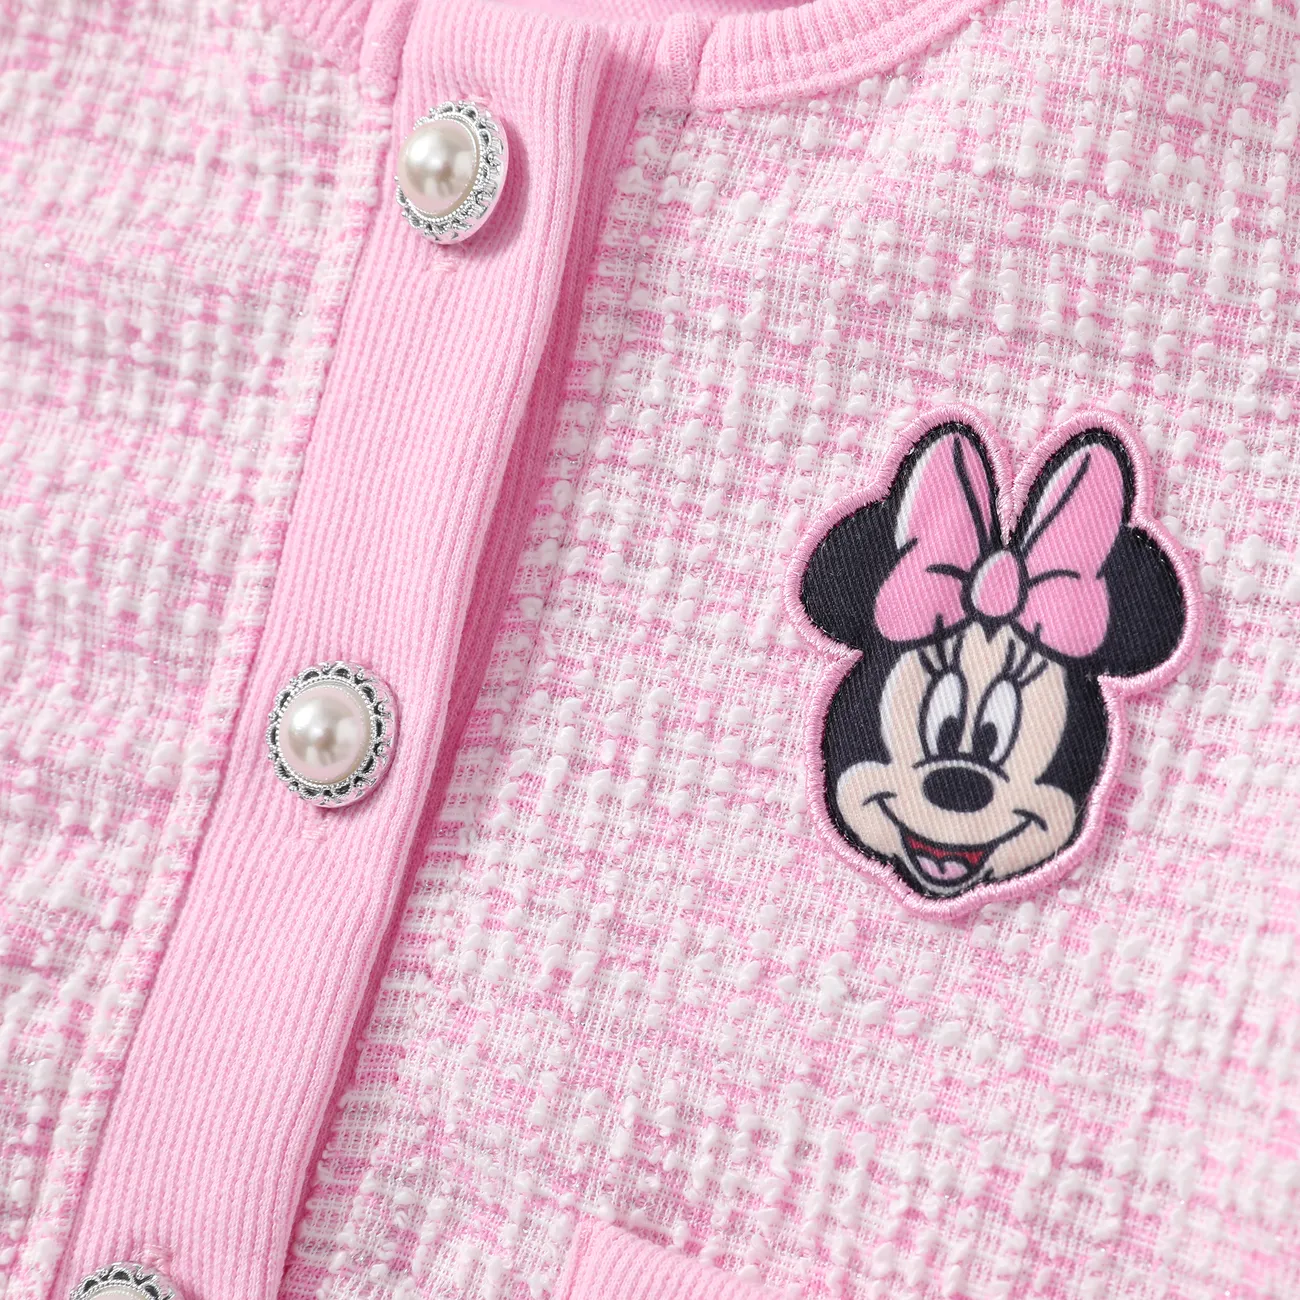 Disney Mickey and Friends Toddler/Kid Girls 2pcs Sweet Pink Houndstooth Secret Button Top with Skirt Set Pink big image 1